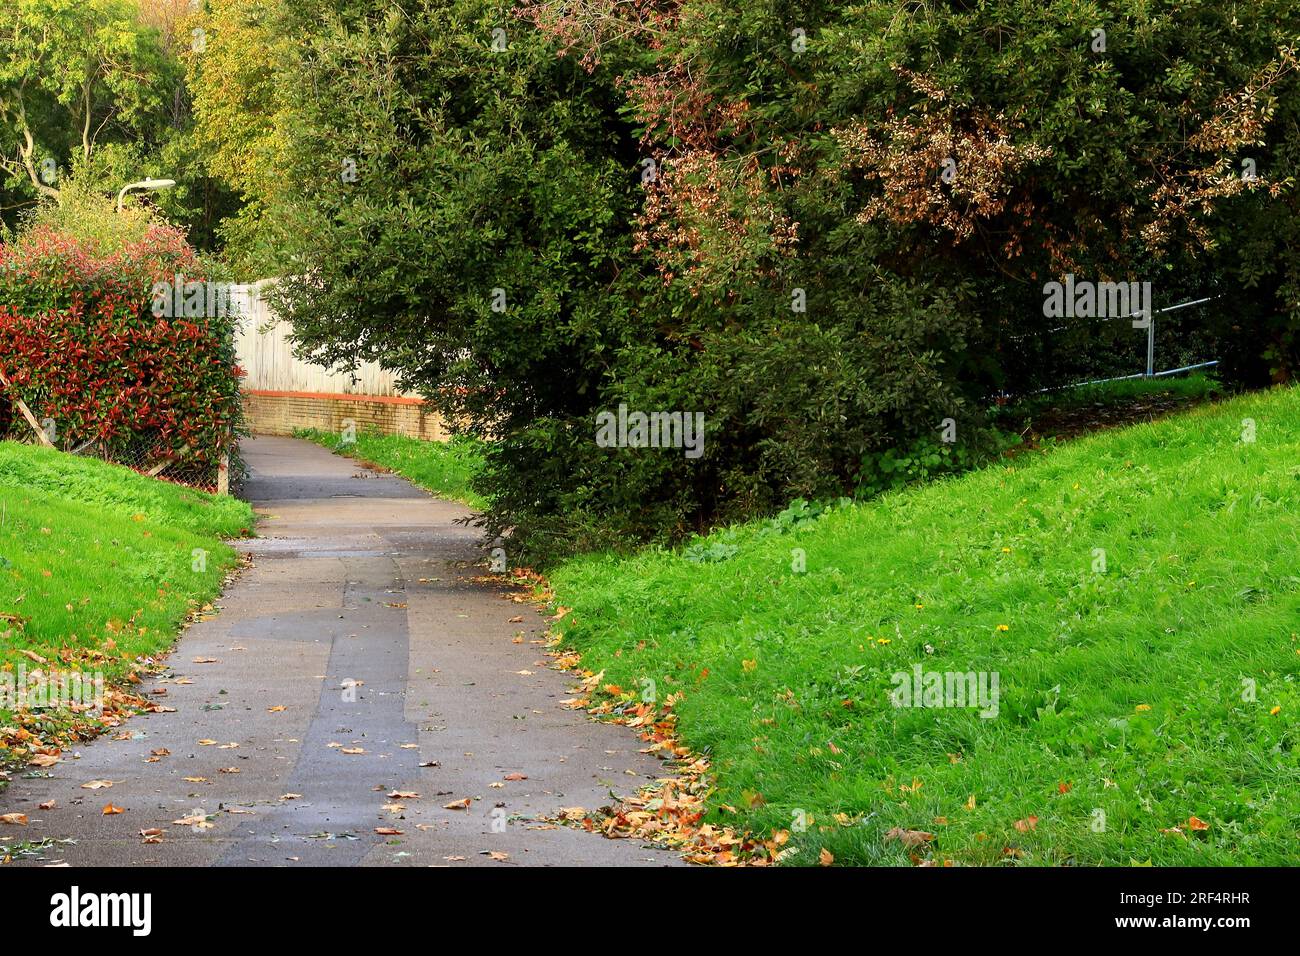 Autumn landscape. A slightly curved footpath with lush green grass verges either side, the pathway disappearing between bushes and trees. Stock Photo